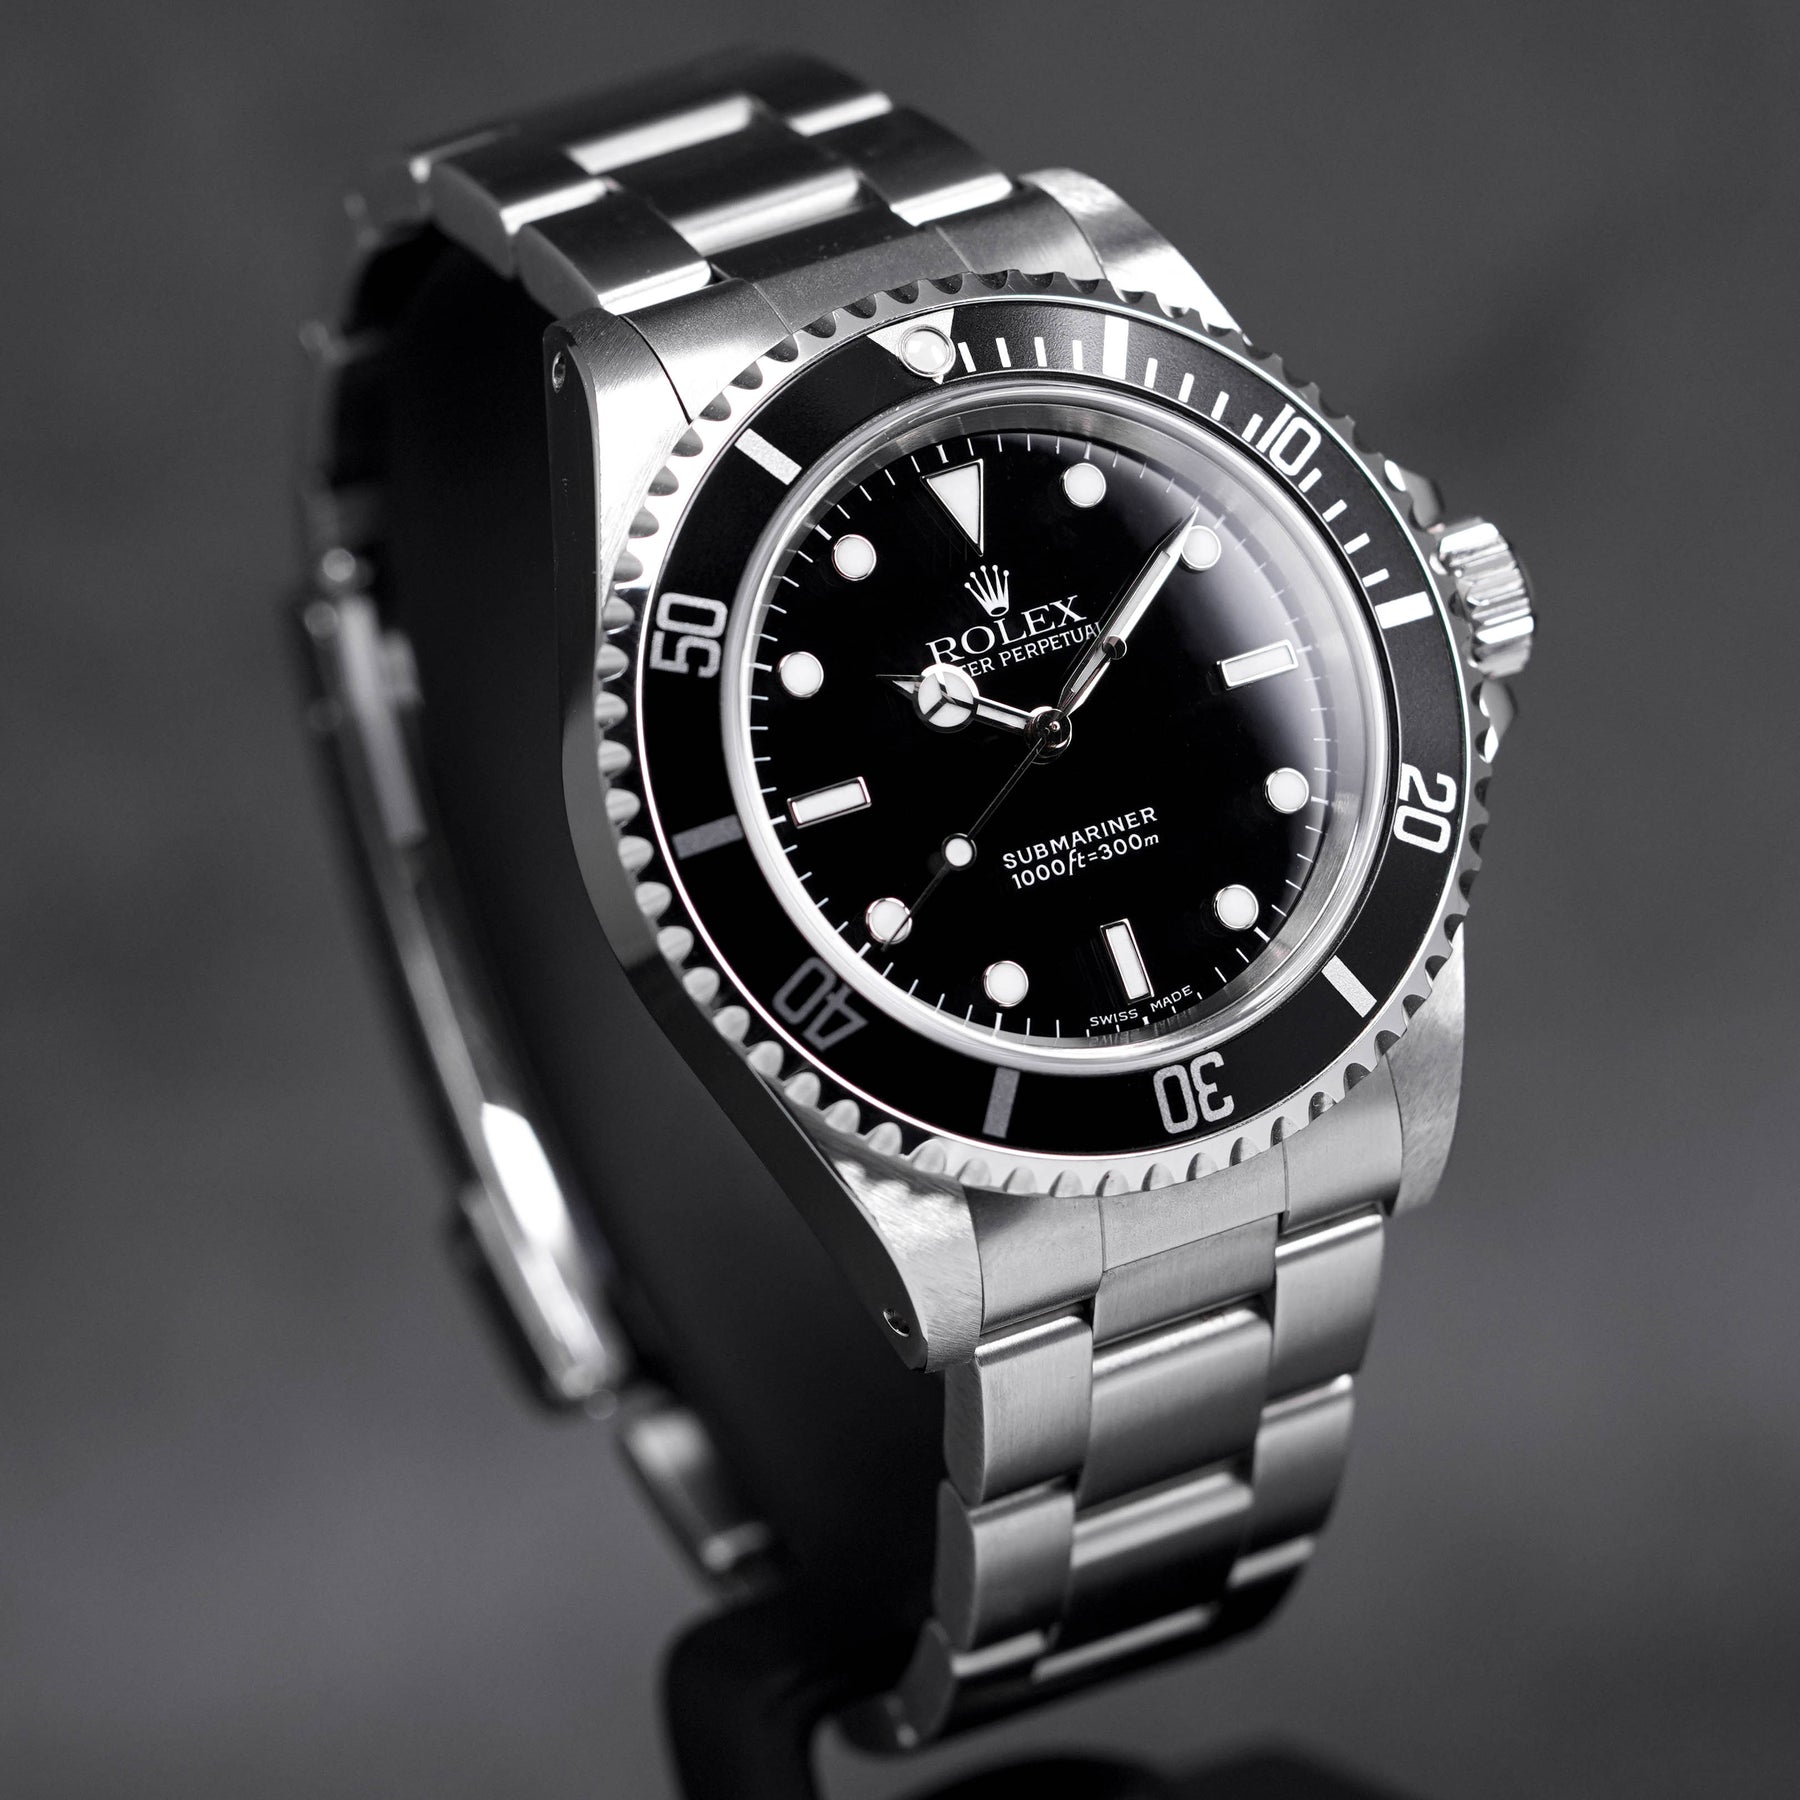 ROLEX SUBMARINER NO DATE 2 LINERS